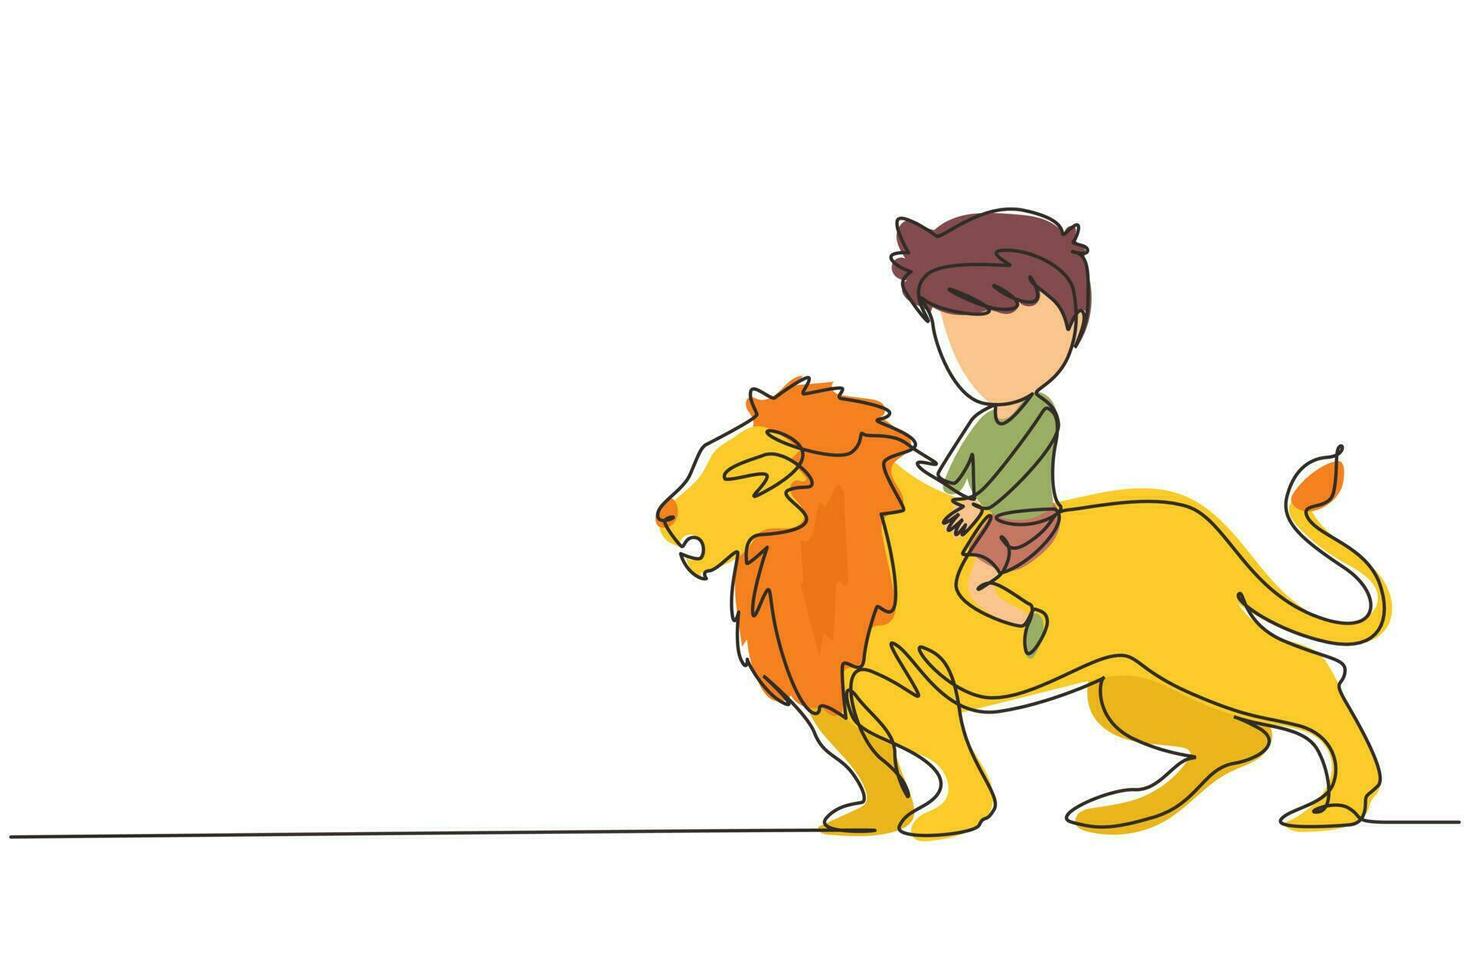 Single continuous line drawing happy little boy riding lion. Child sitting on back big lion at circus event. Kid learning to ride beast animal. Dynamic one line draw graphic design vector illustration